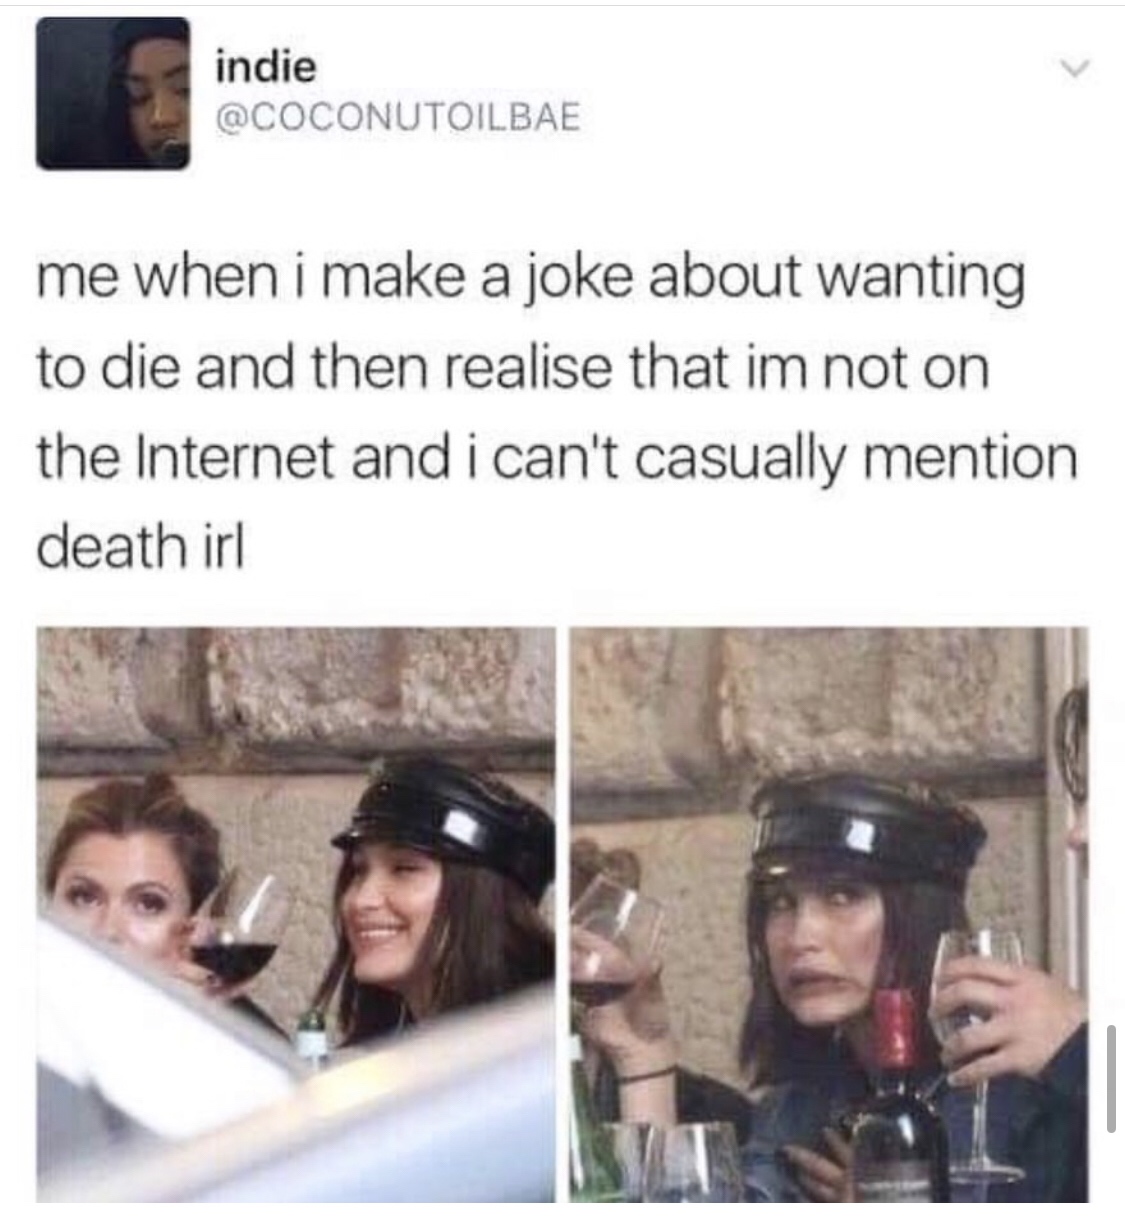 meme bella hadid - indie me when i make a joke about wanting to die and then realise that im not on the Internet and i can't casually mention death irl